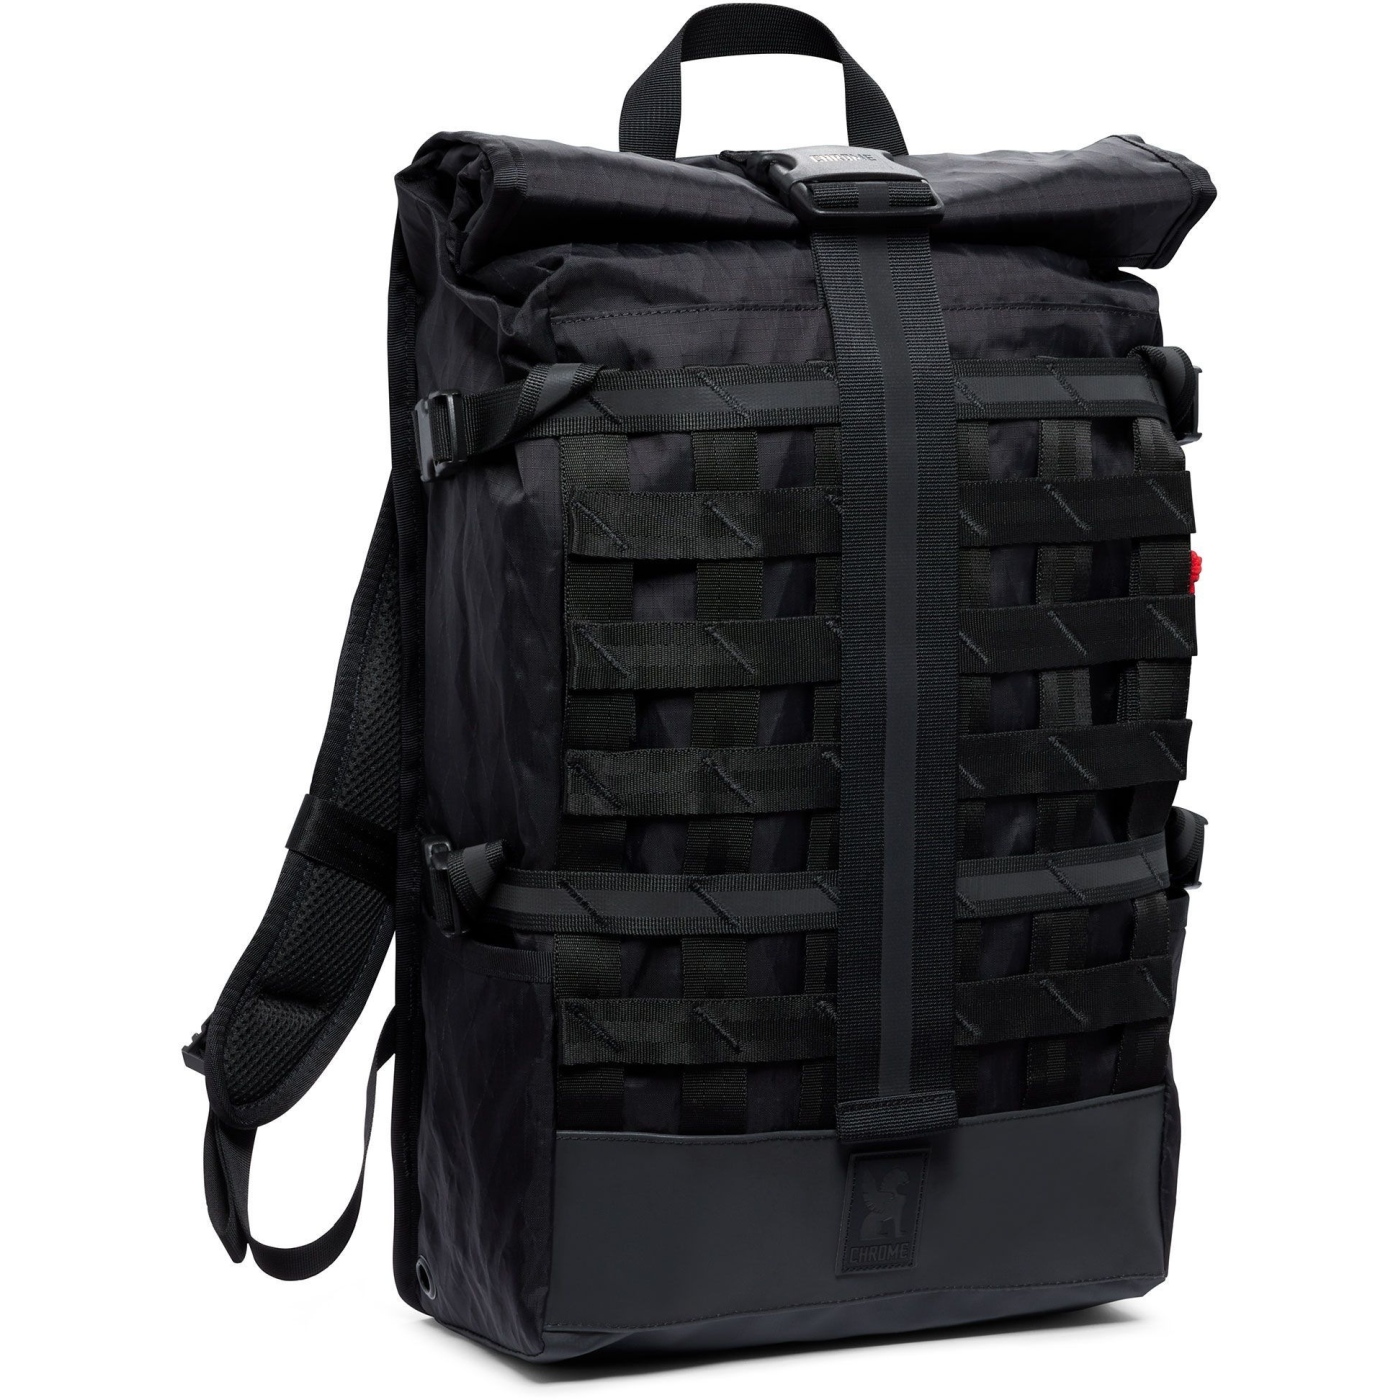 Picture of CHROME Barrage Cargo - Backpack - 18-22 L - Black XRF Reflective